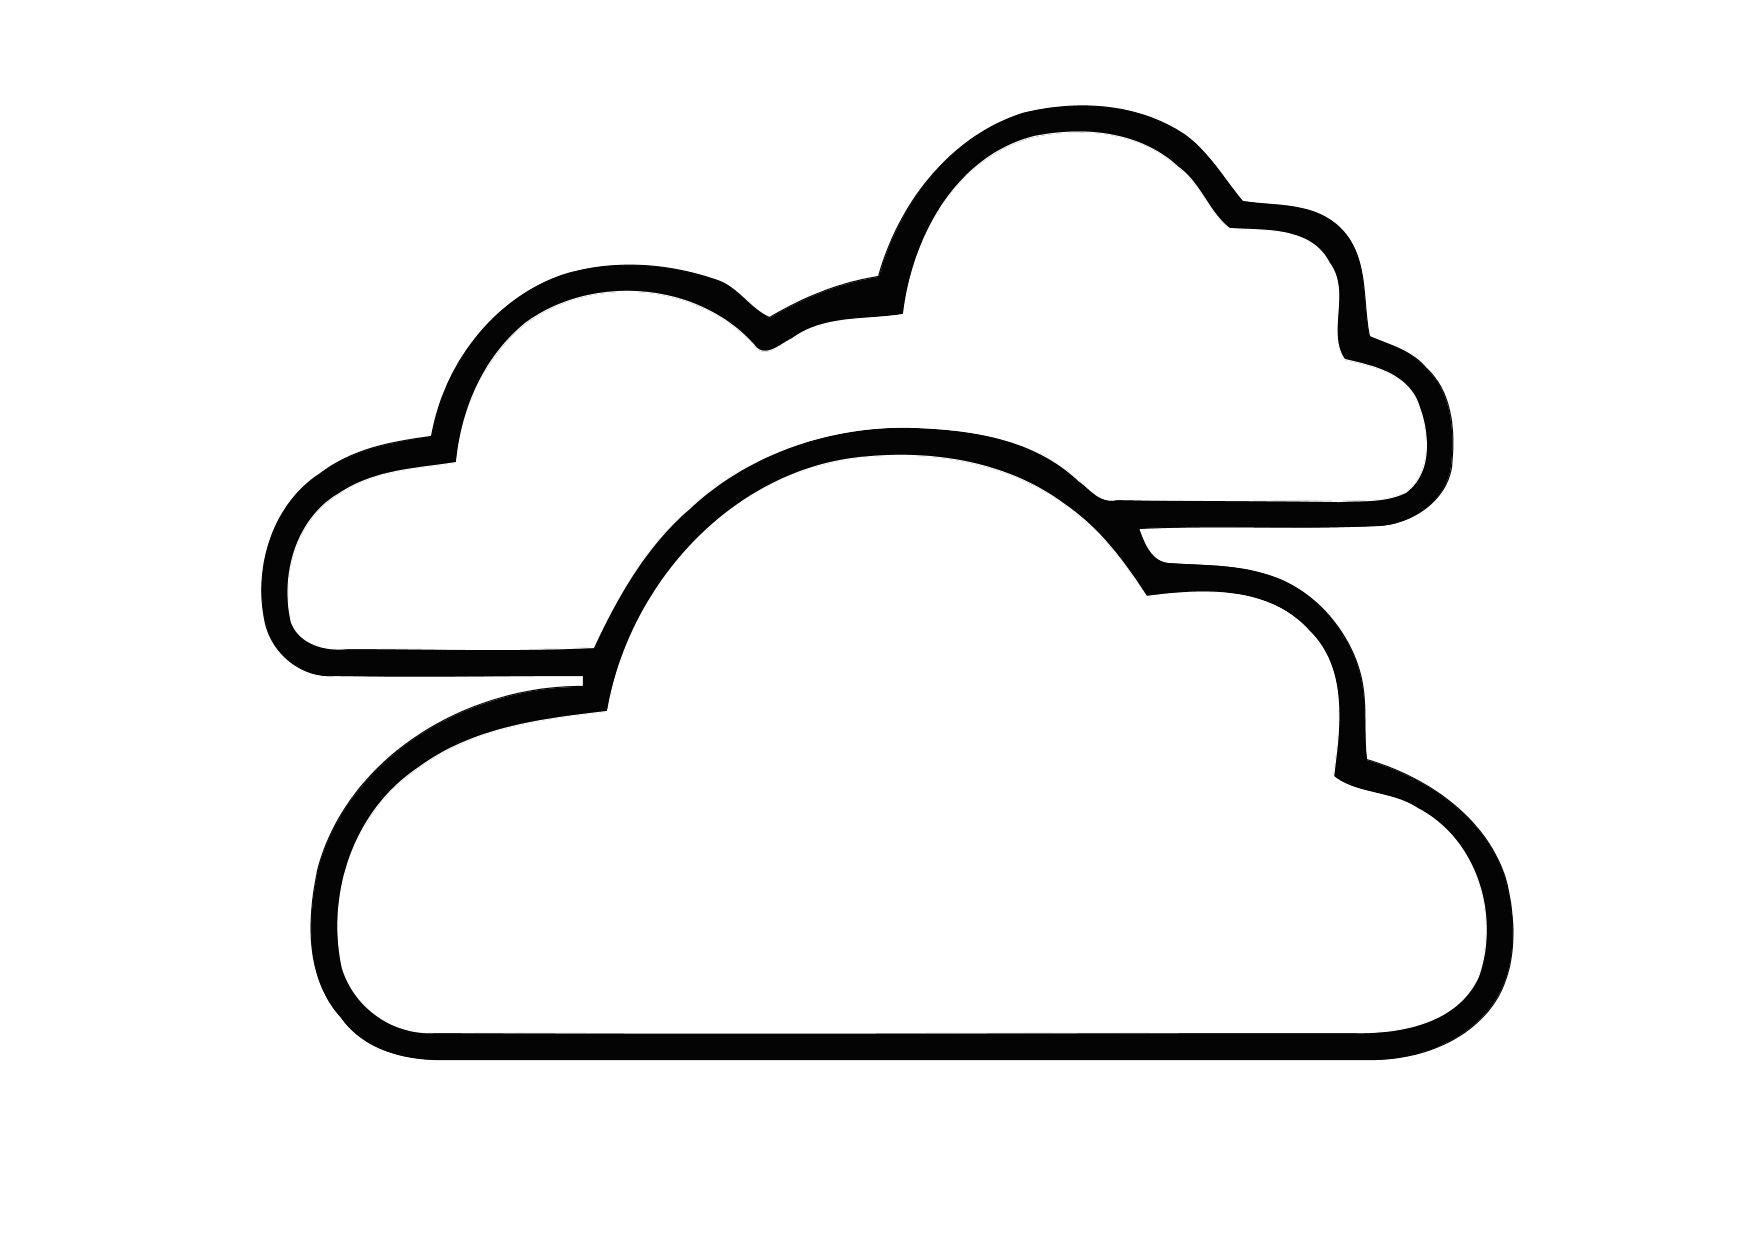 Coloring Pages Of Clouds - AZ Coloring Pages